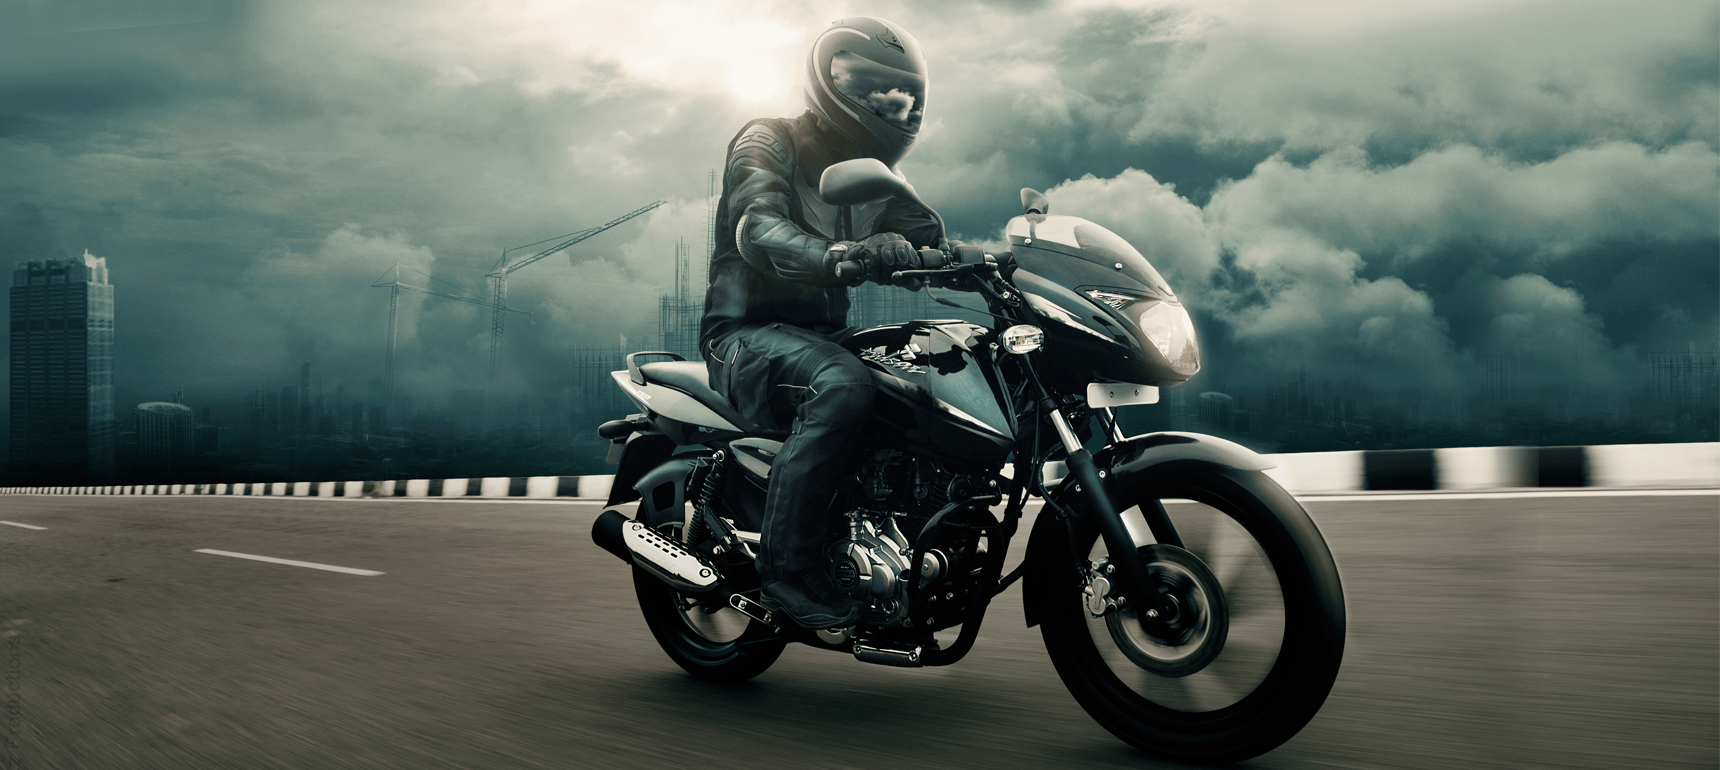 A biker is riding black and blue color Bajaj Pulsar 150cc motorcycle wearing black leather jacket and helmet in open road